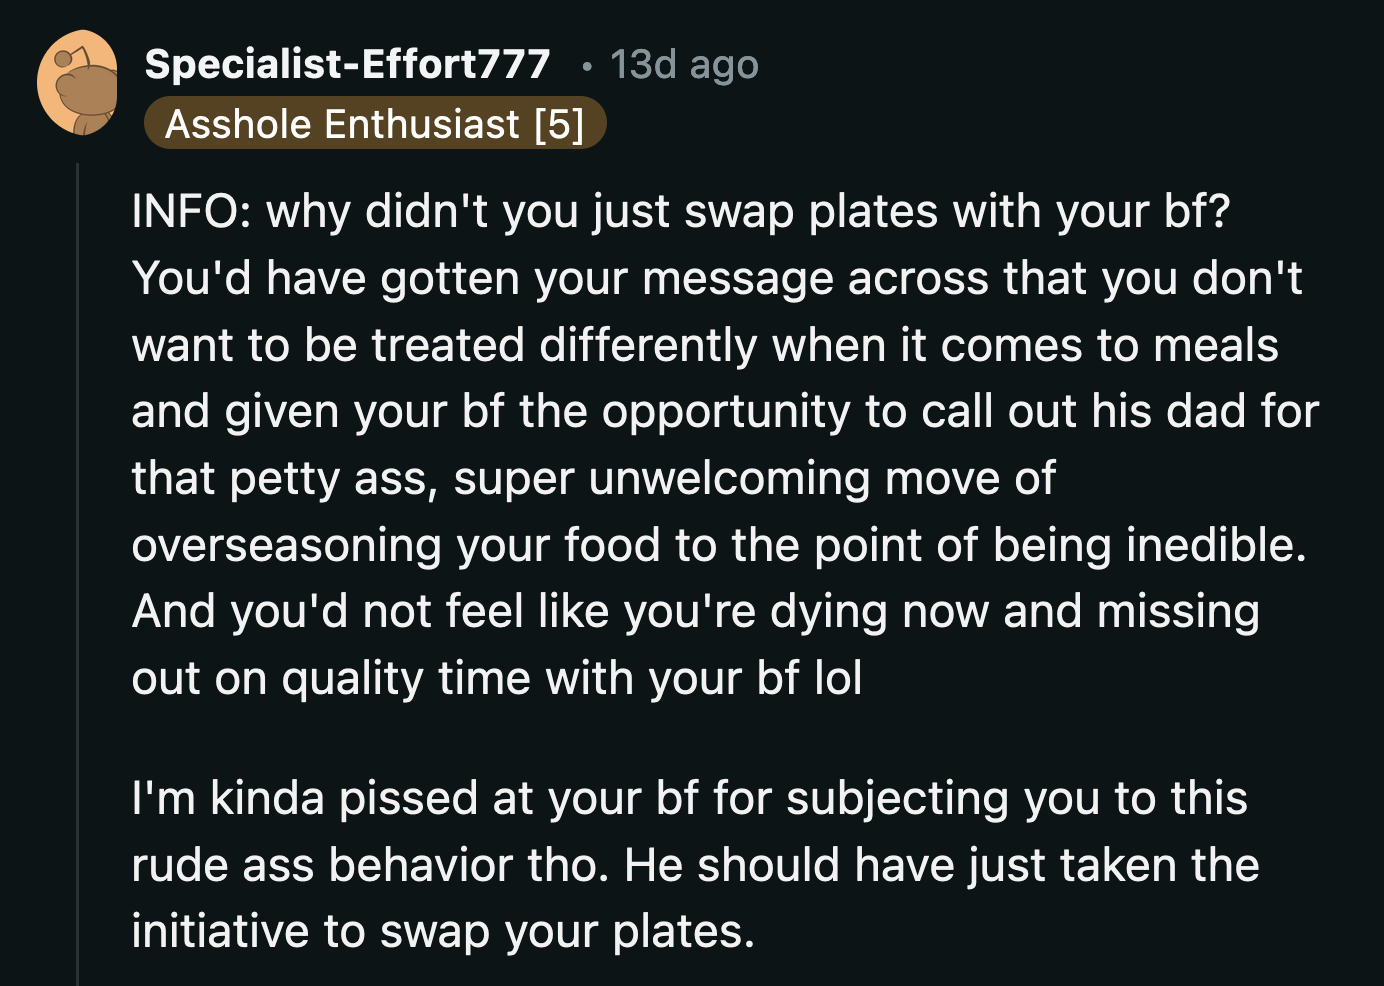 OP said his boyfriend insisted on swapping plates with him, but he was too spiteful to listen.